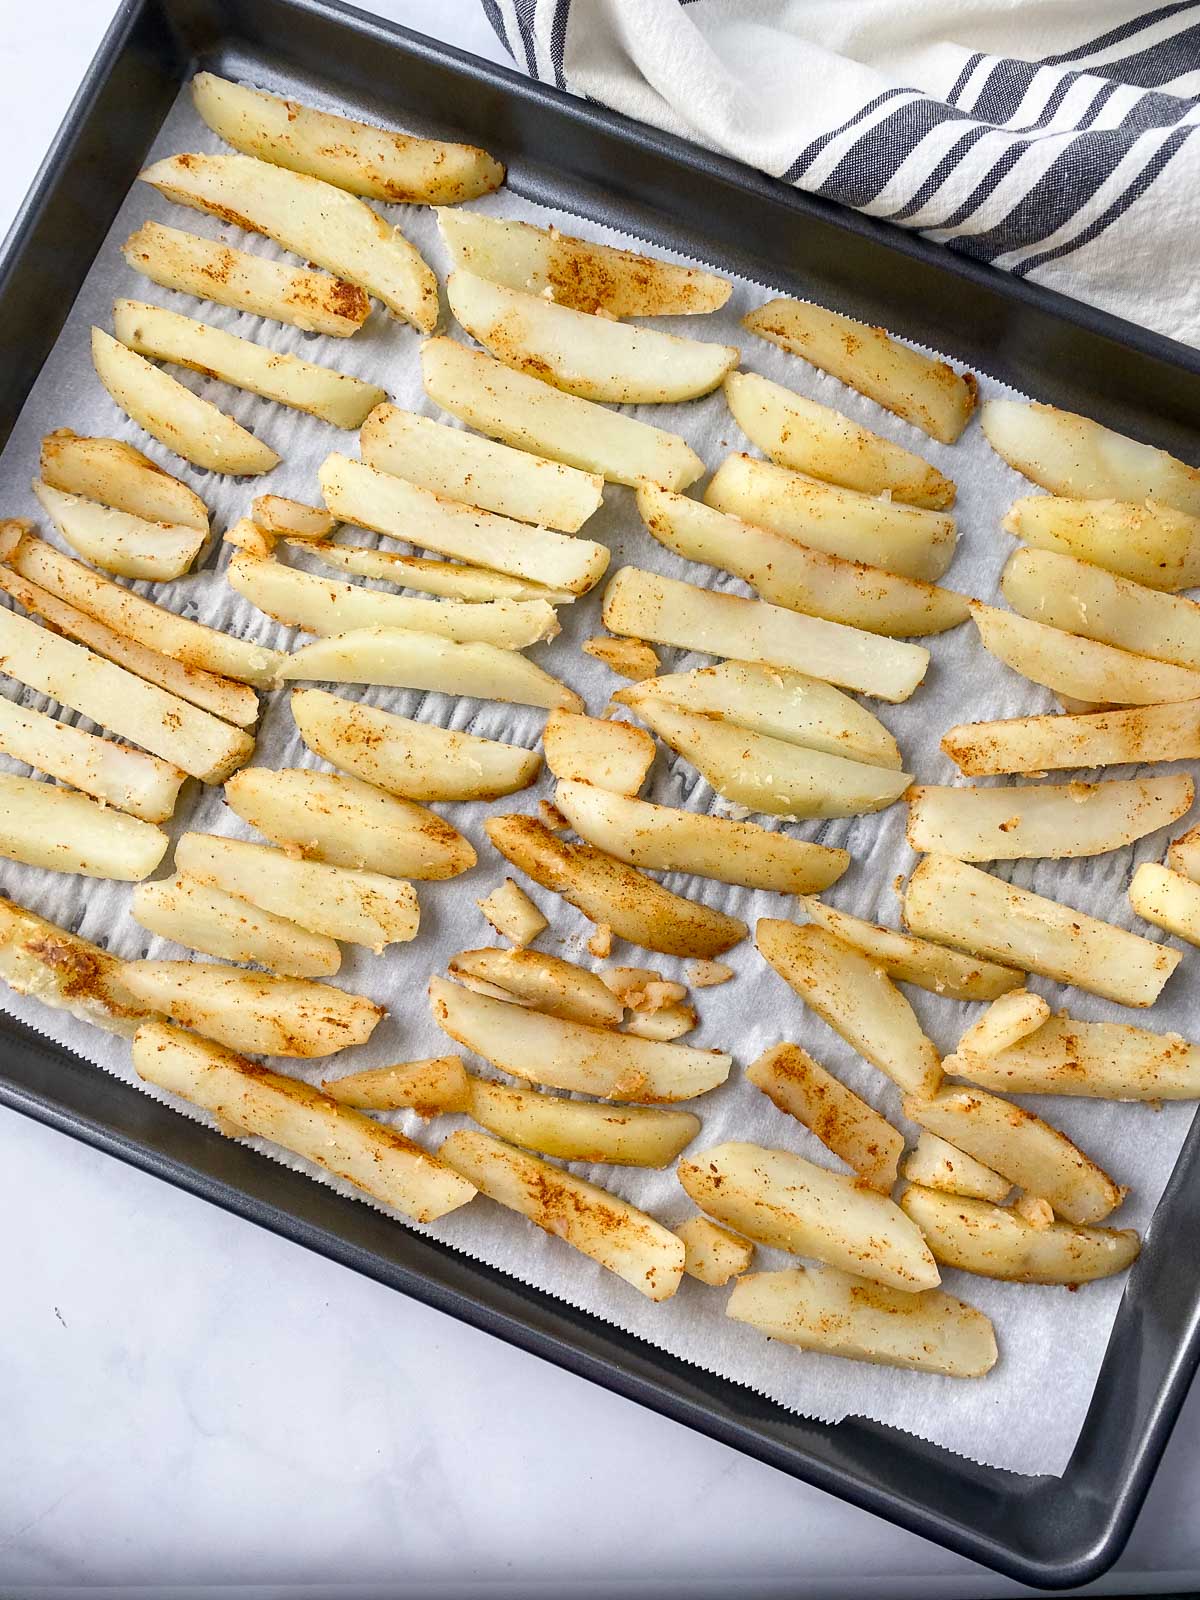 Unbaked fries on parchment lined baking sheet